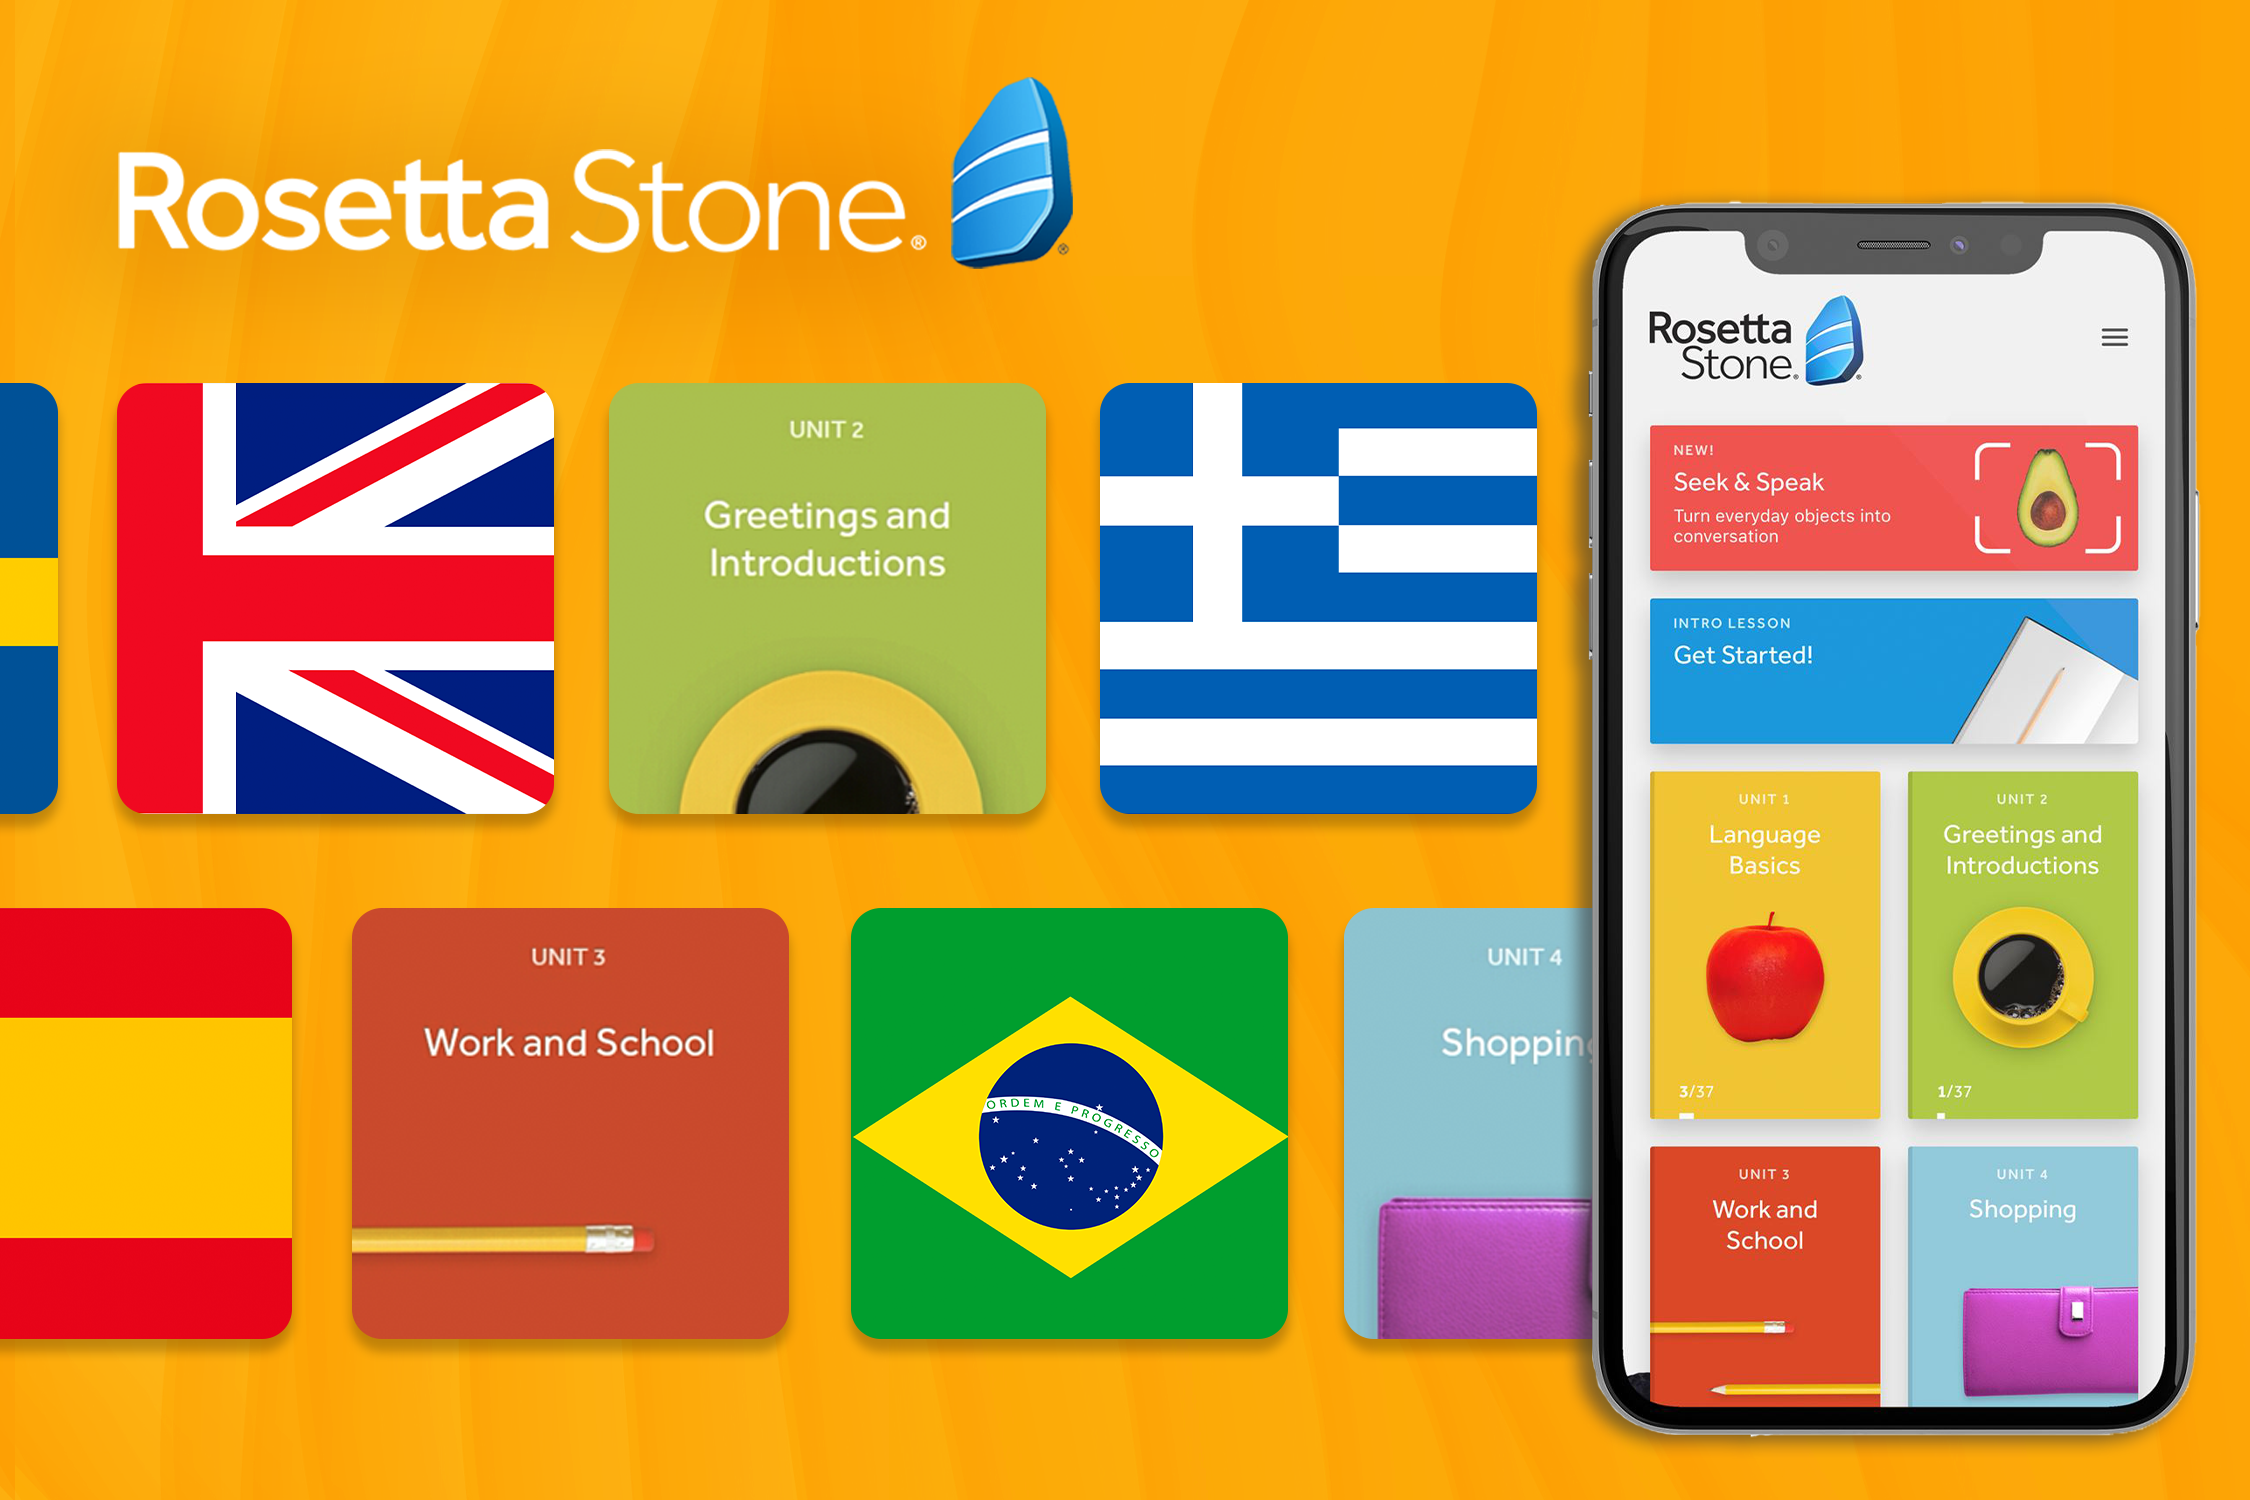 Sign up for a lifetime of Rosetta Stone for more than half off